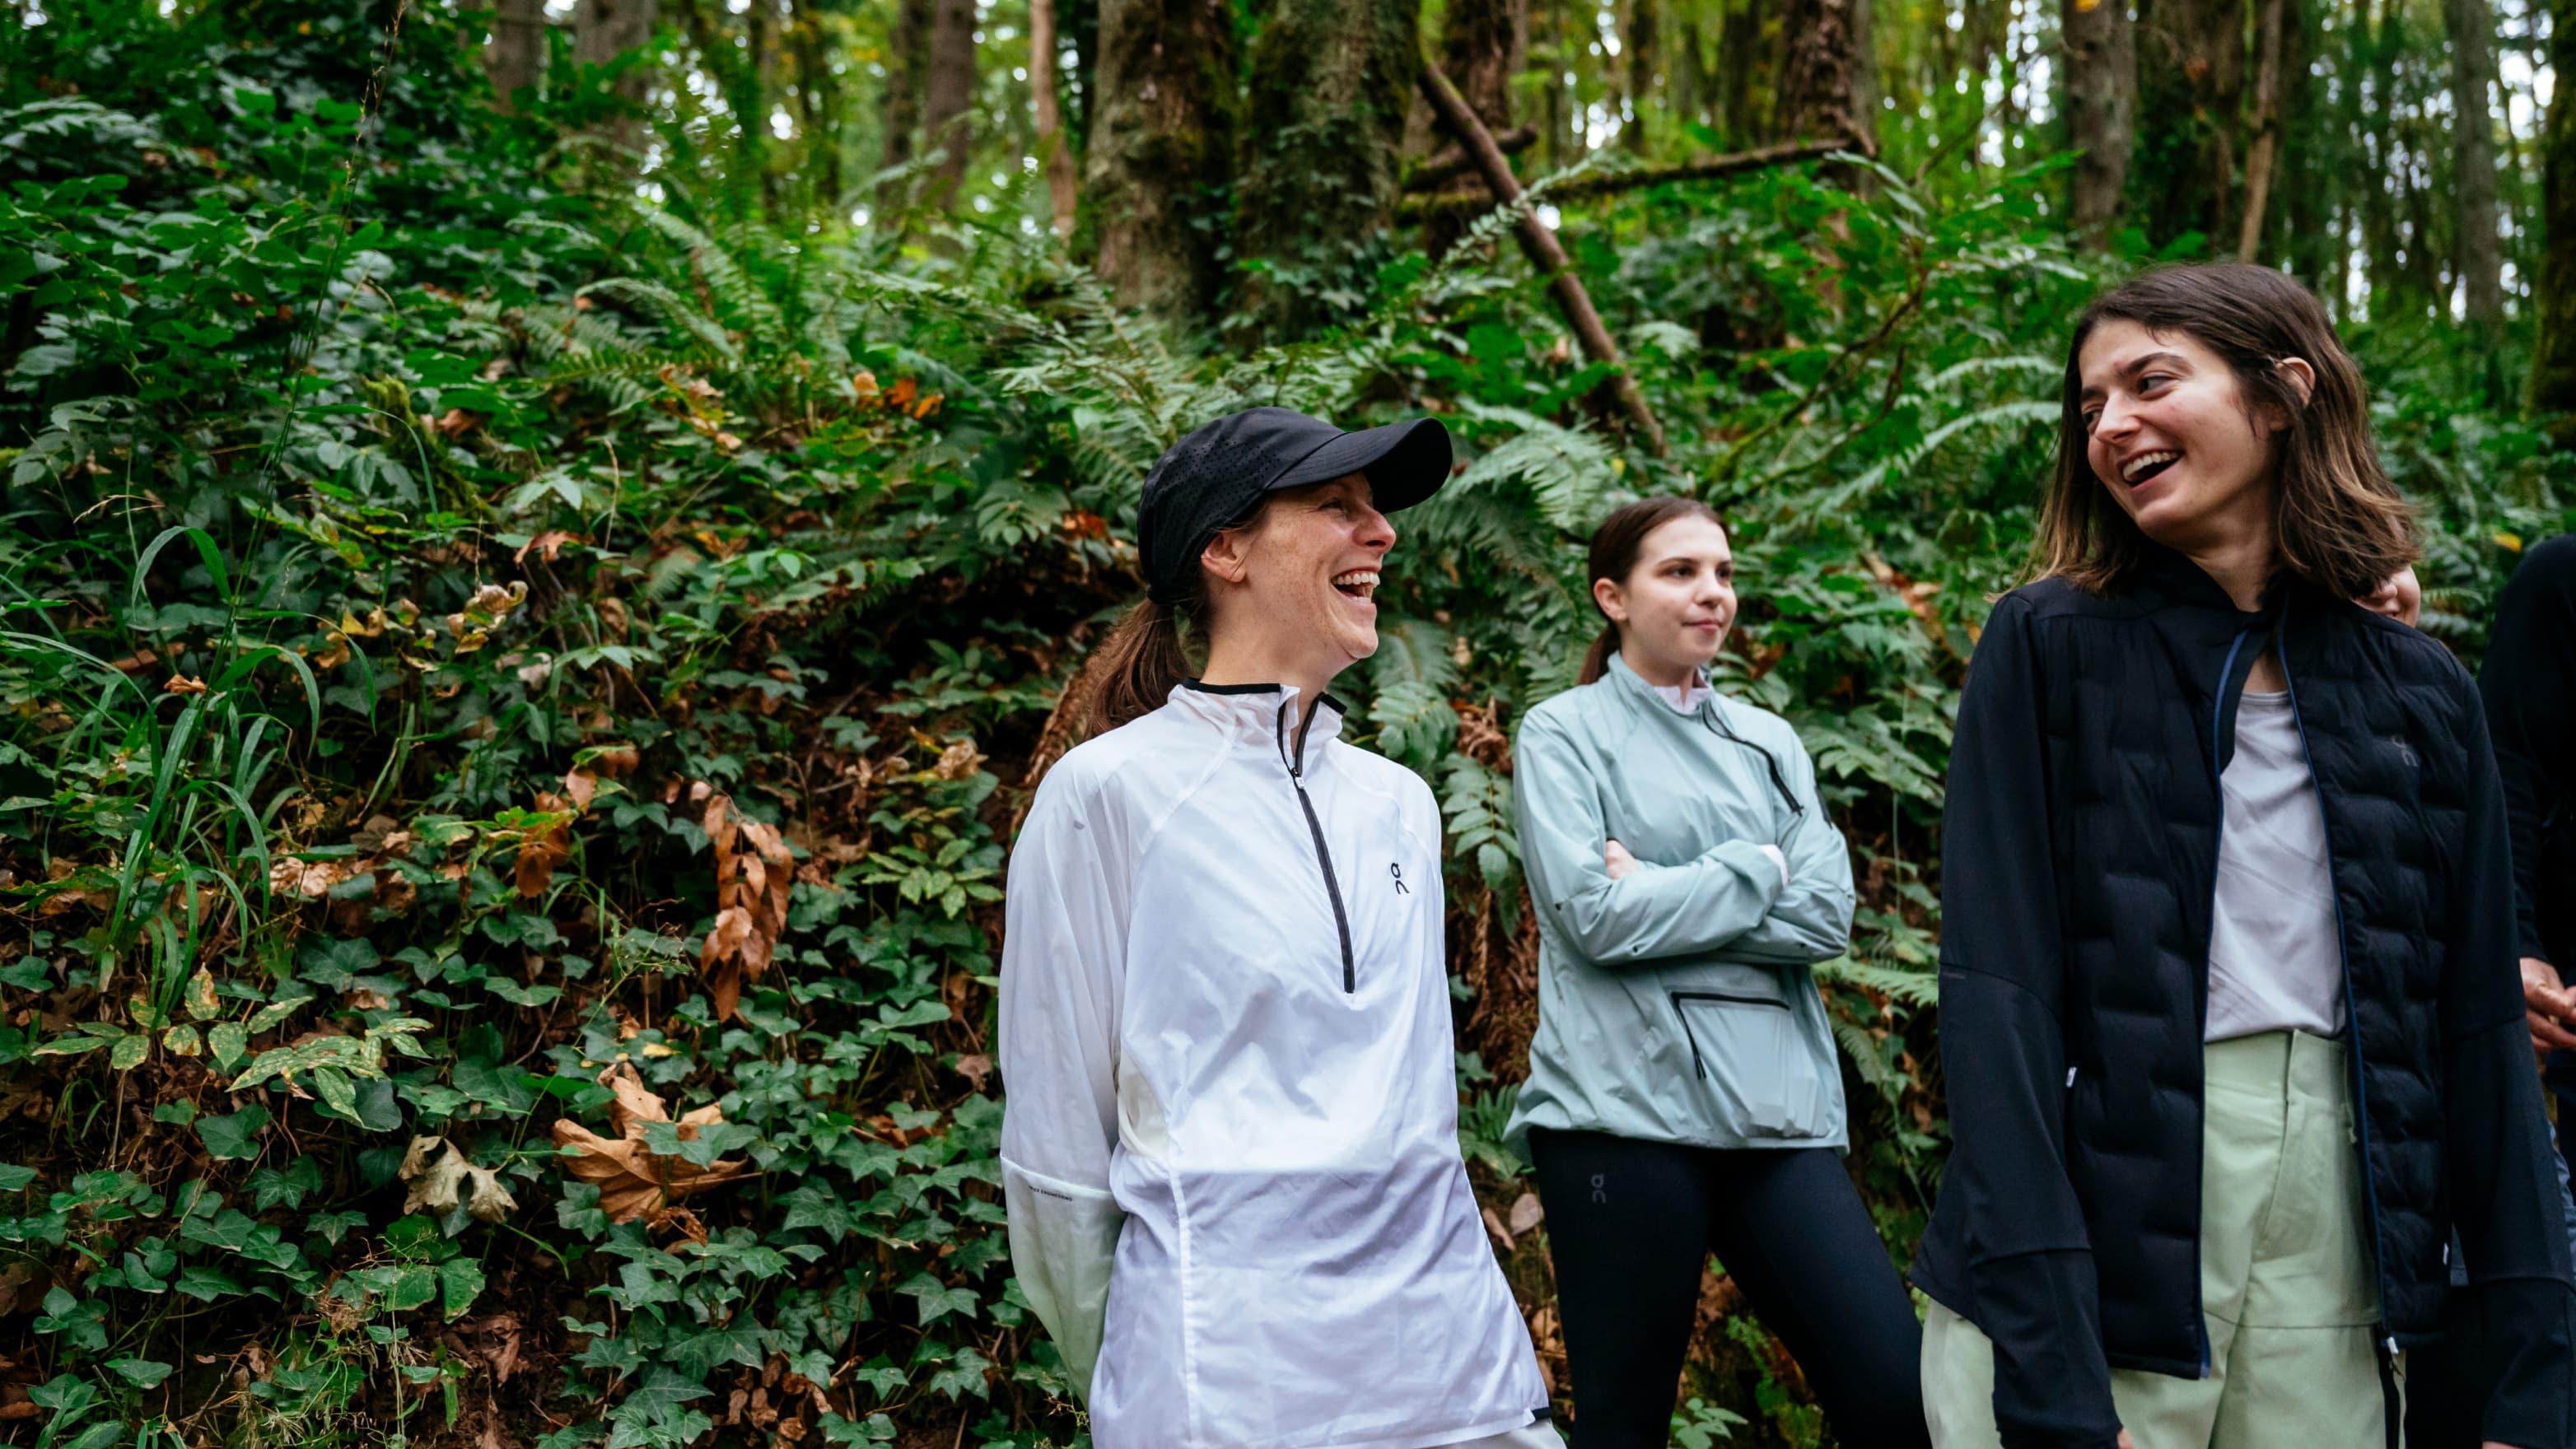 People laugh in the forest after running session